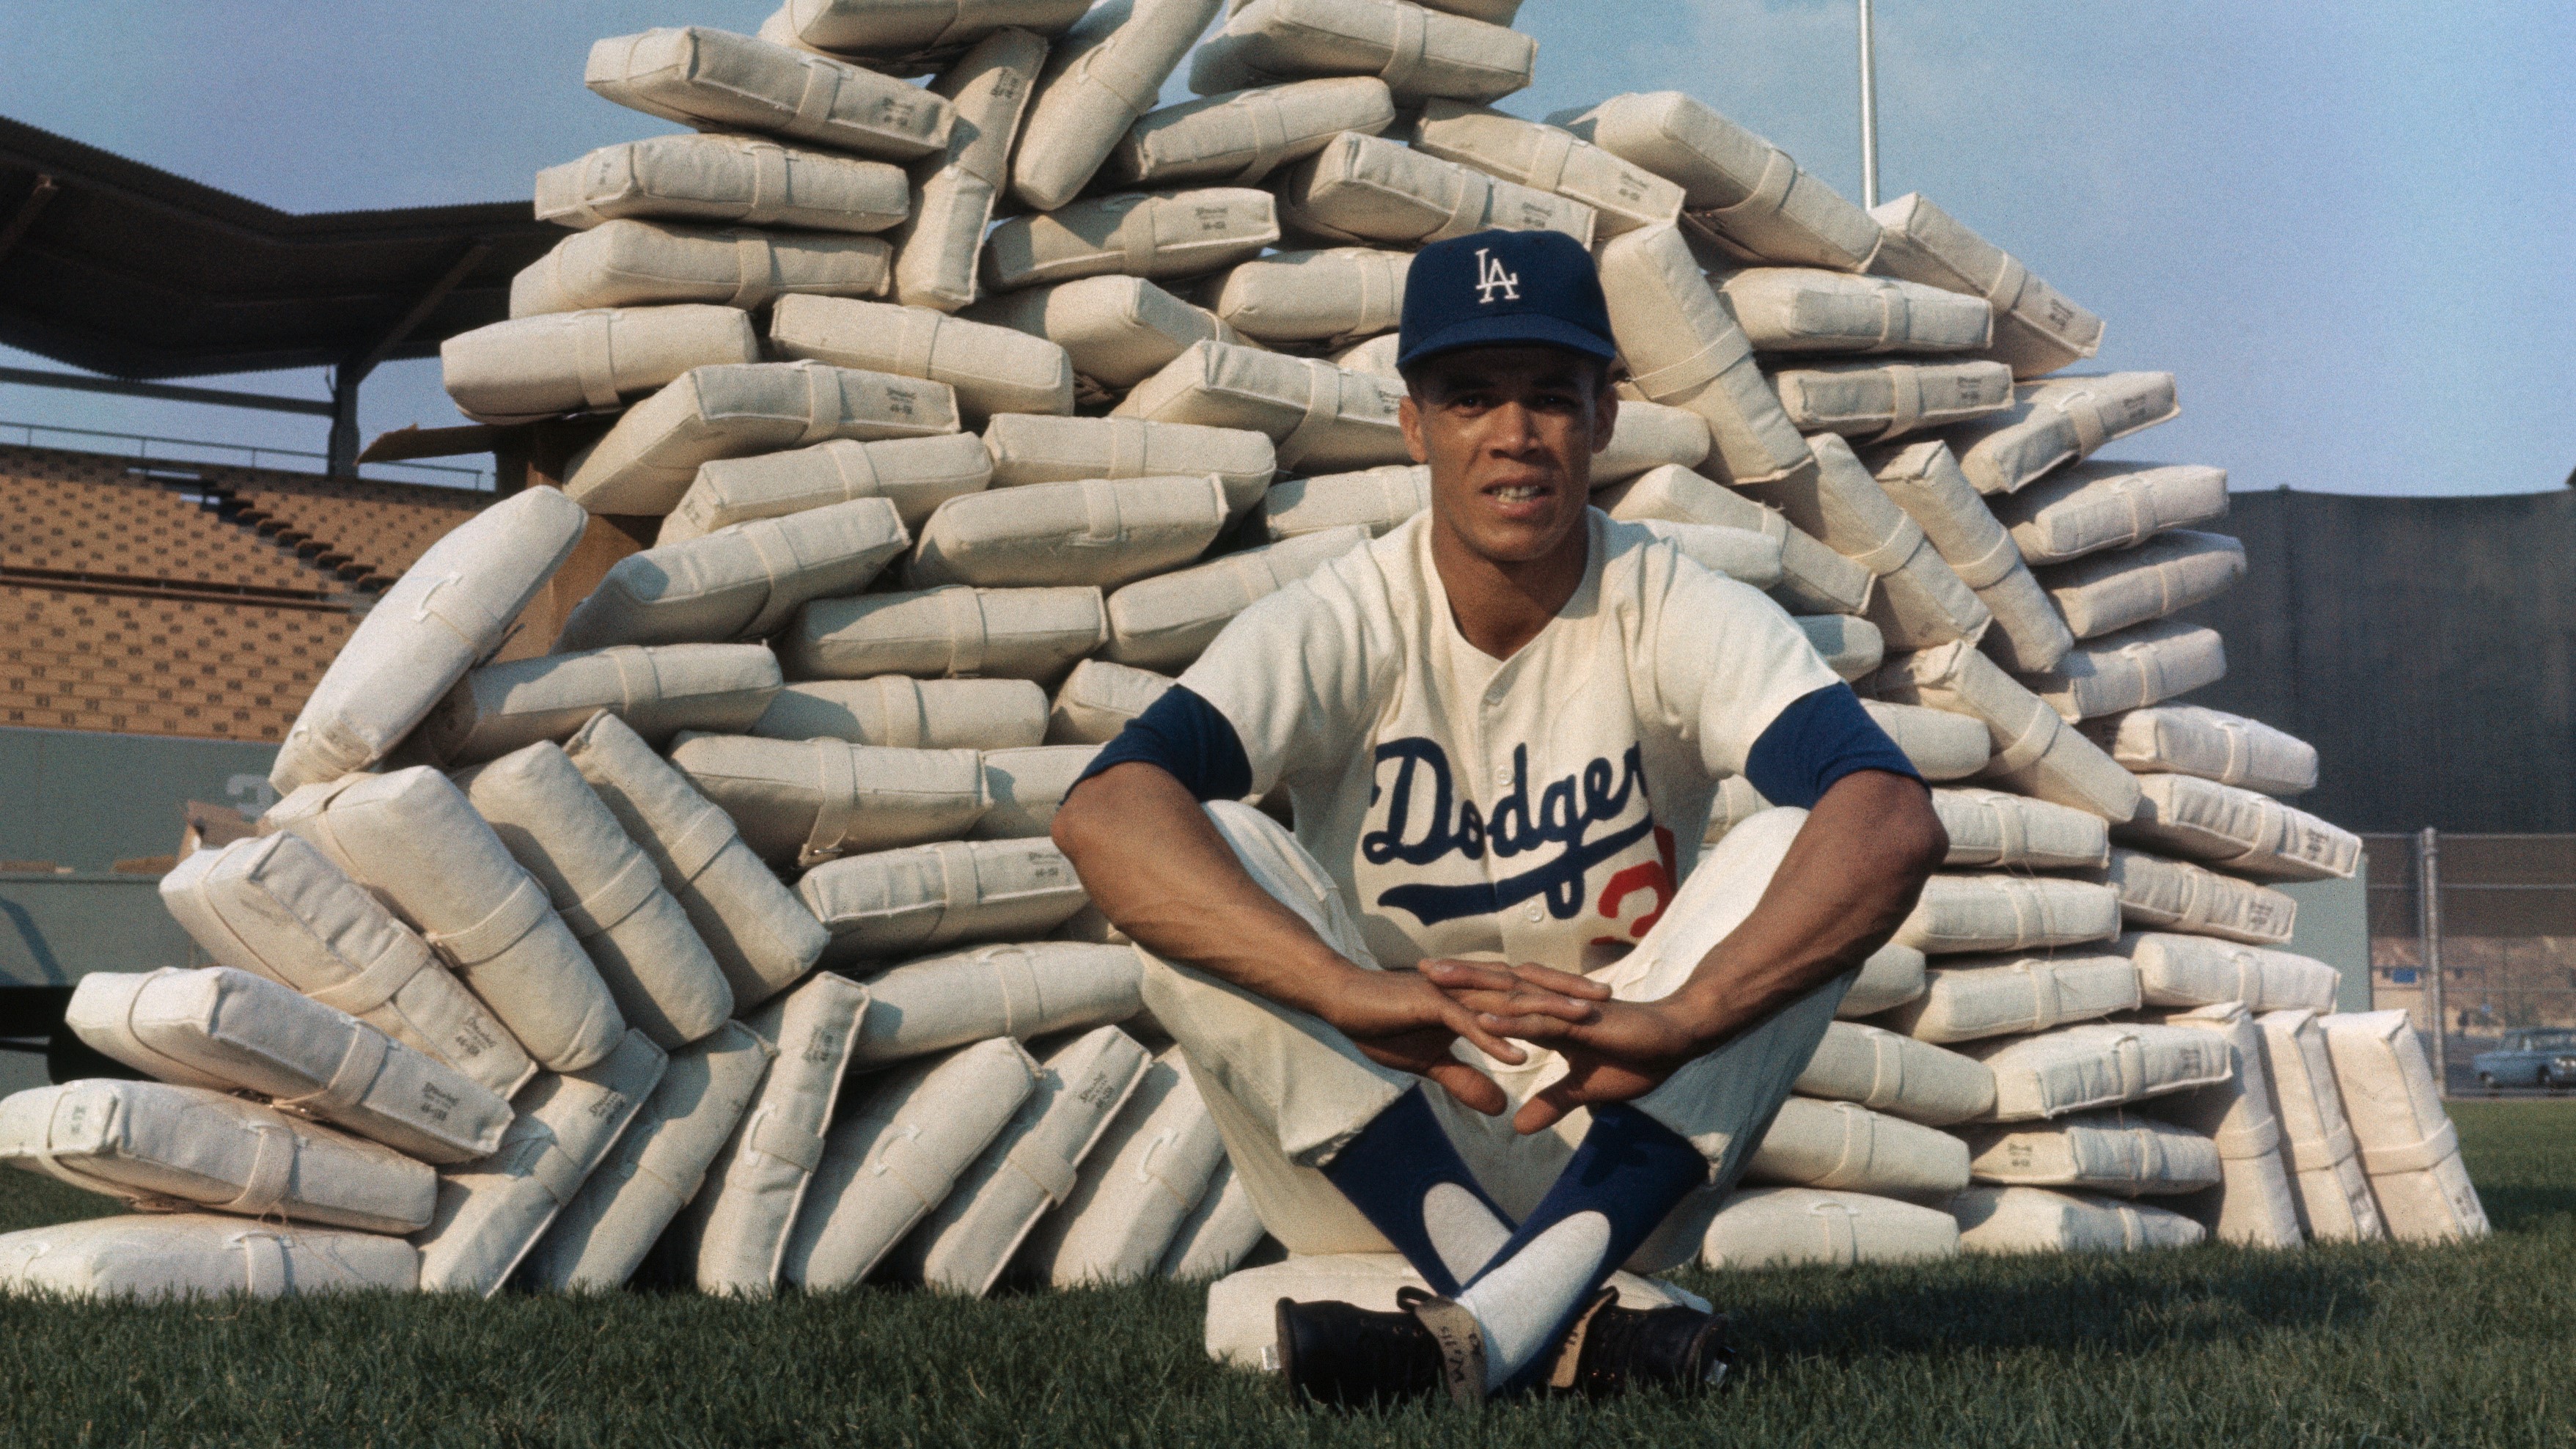 Maury Wills, former Seattle Mariners manager, dies at 89